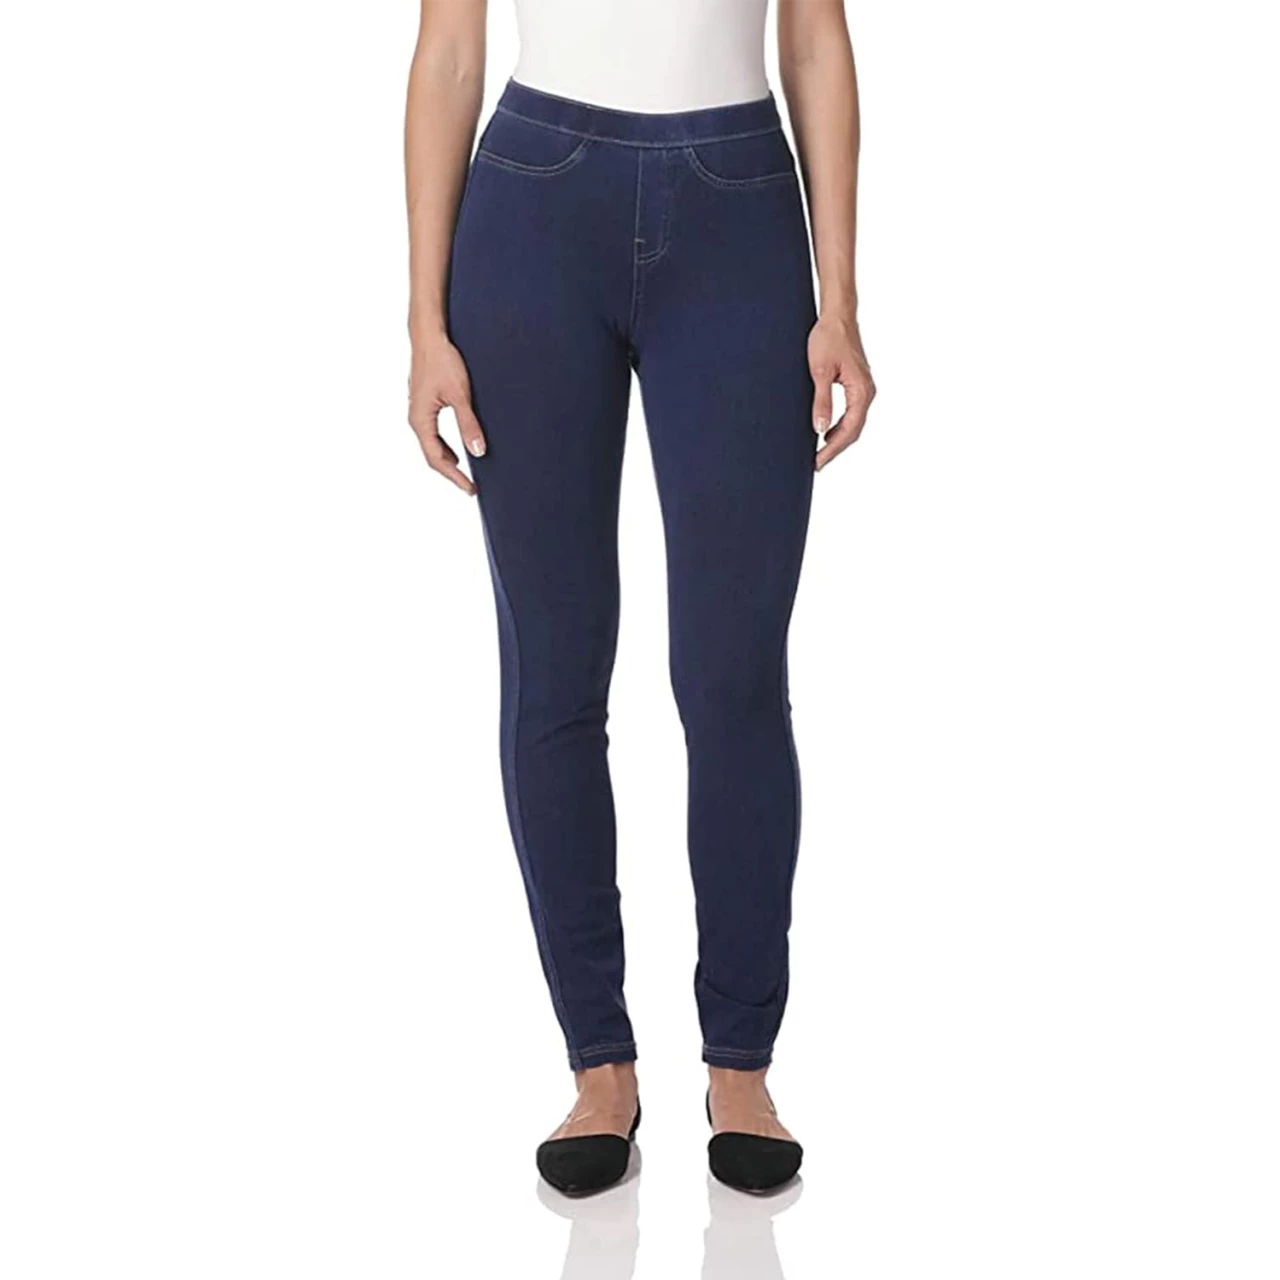 No nonsense Women&rsquo;s Classic Leggings with Back Pockets